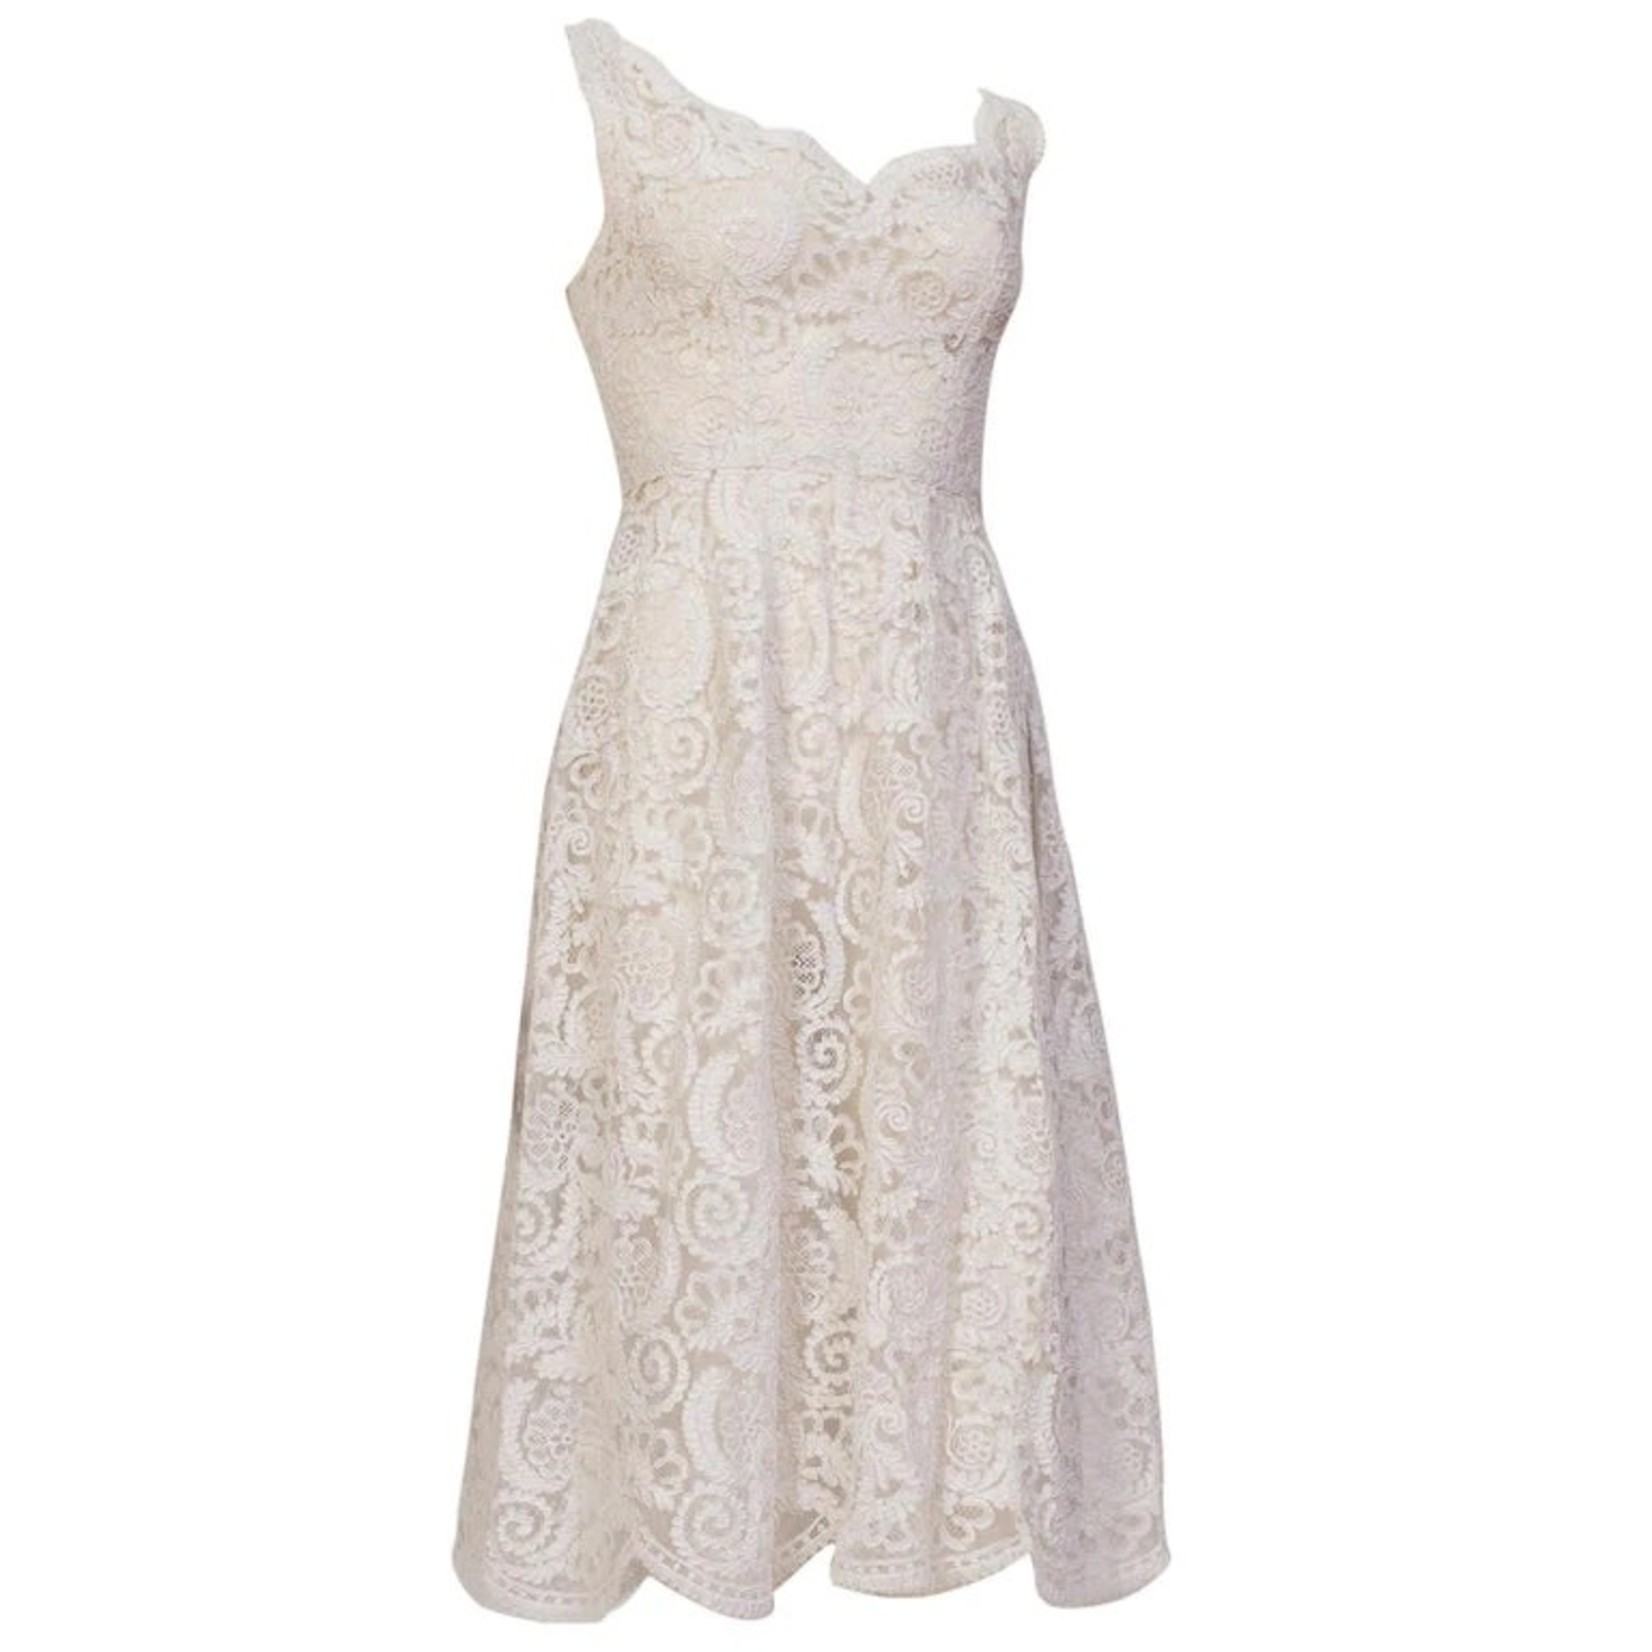 Wyld Blue Vintage 1950s White Couture Grade Lace Dress With Exceptional Hand Finishing